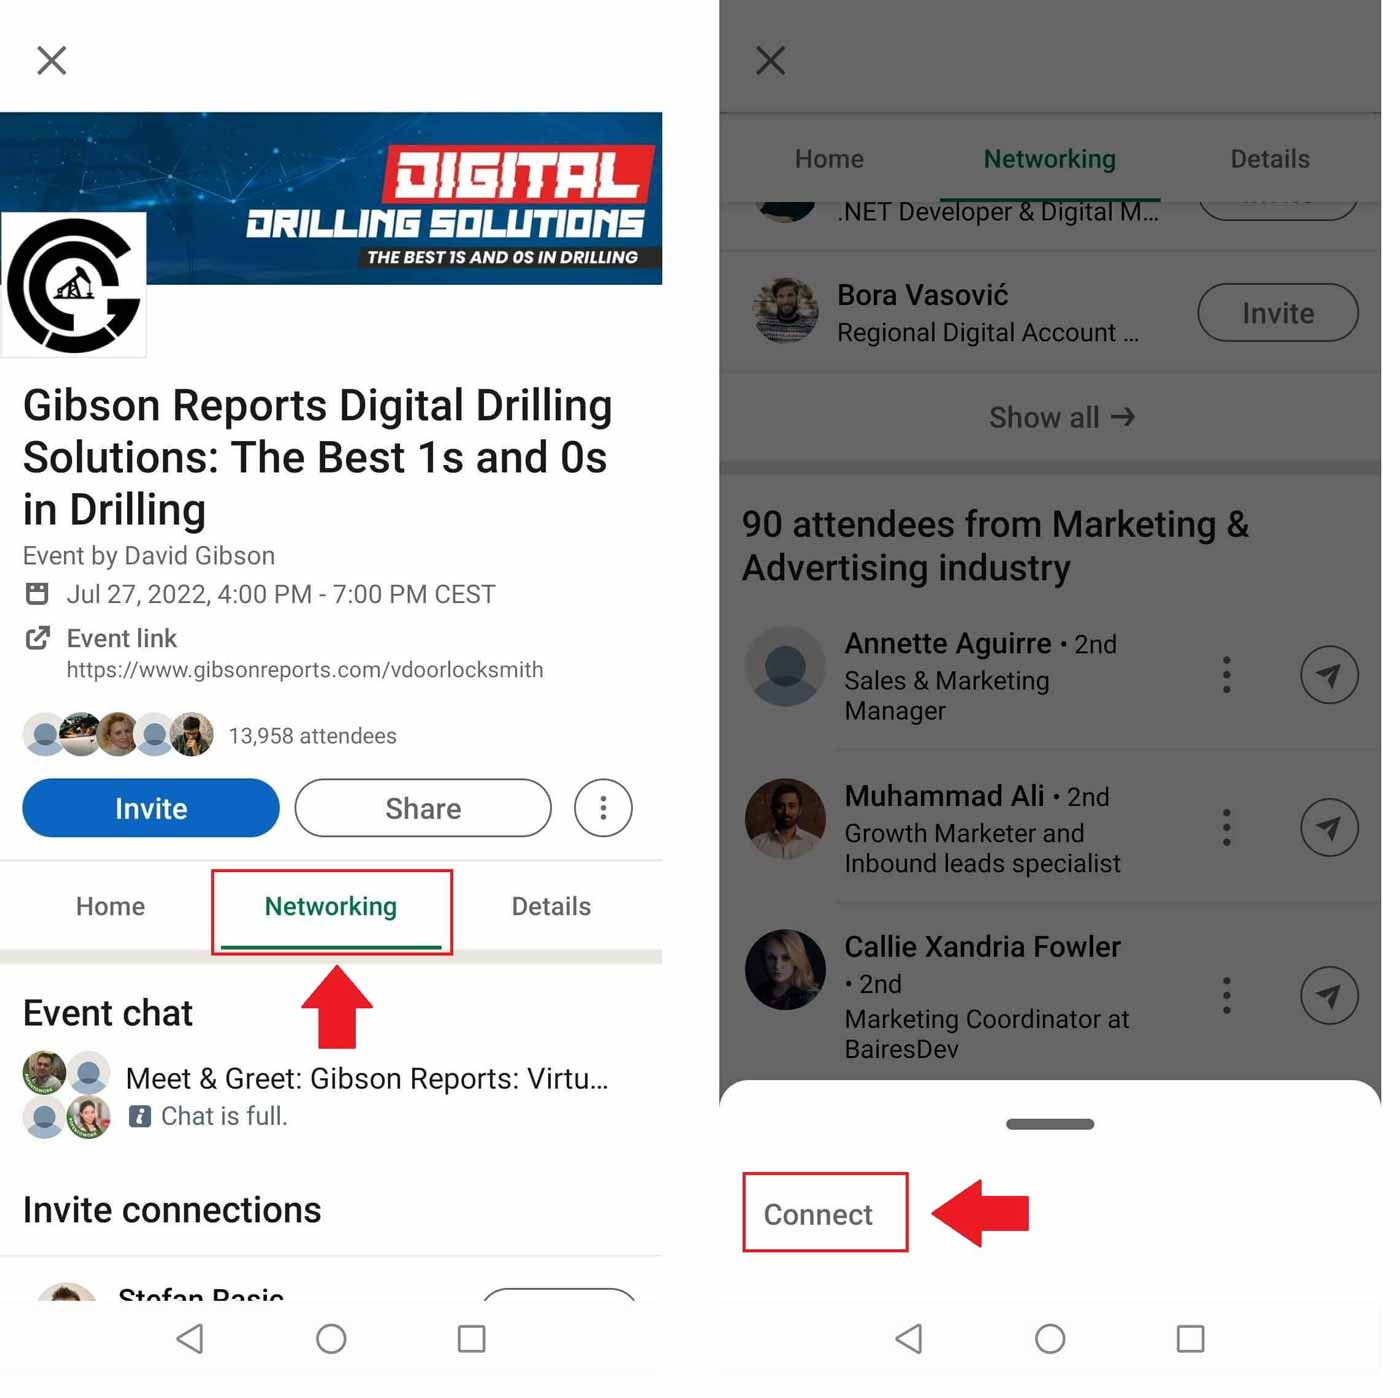 Image showing how to connect on LinkedIn with someone who attended an event using LinkedIn app